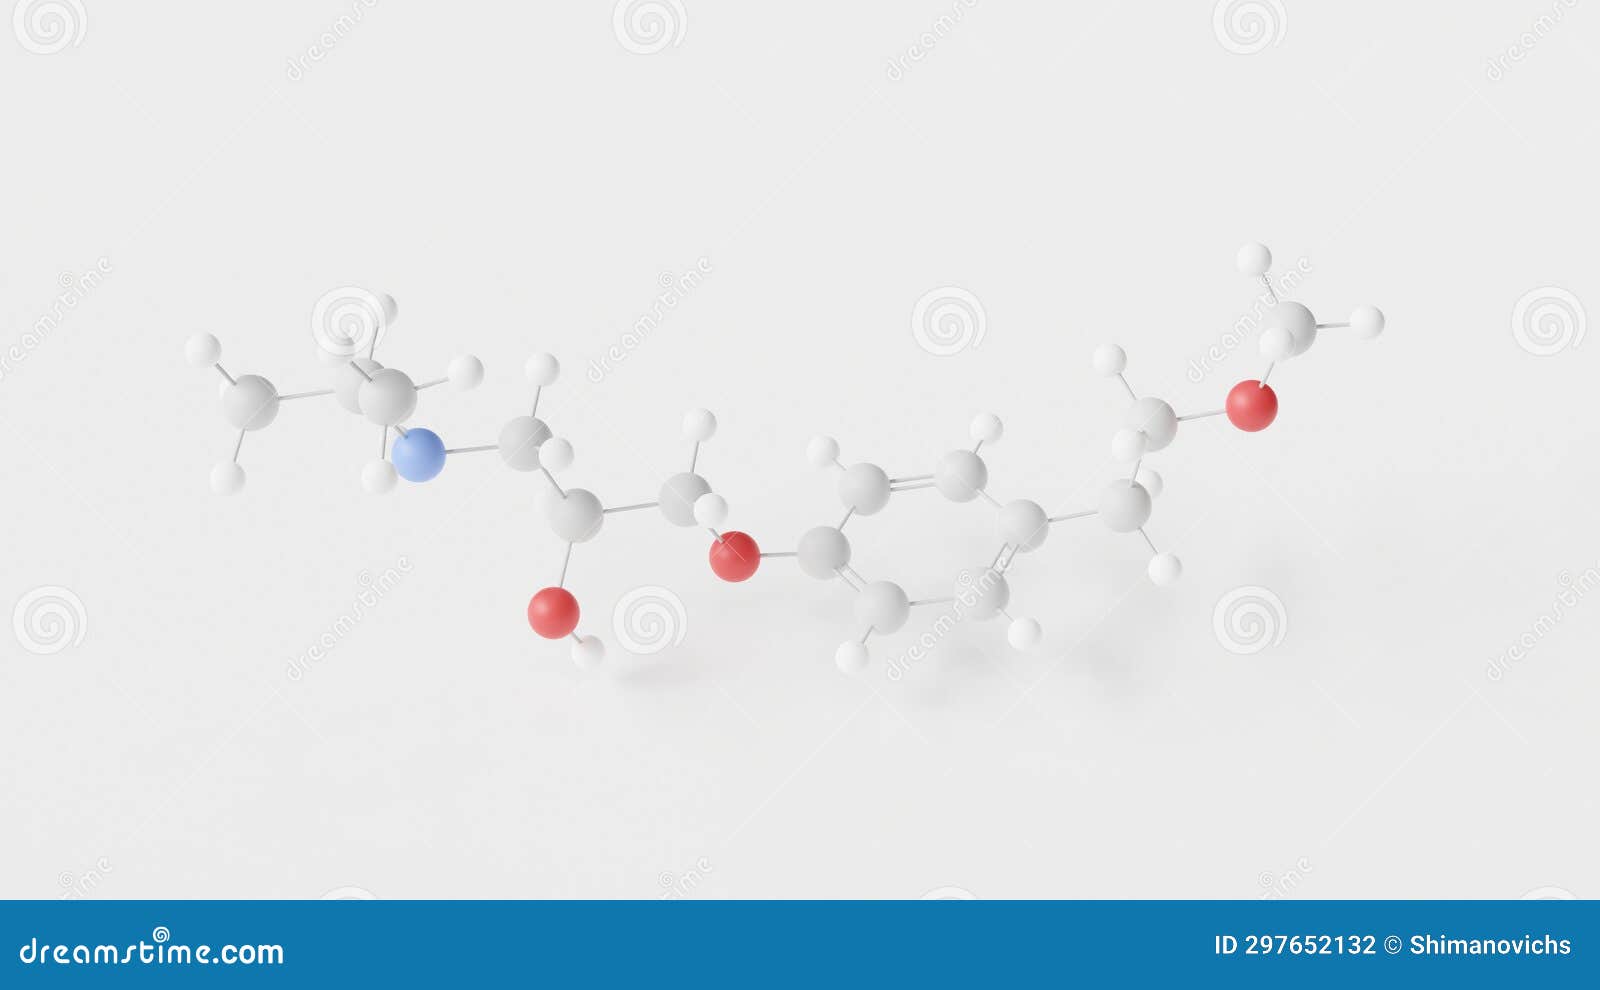 metoprolol molecule 3d, molecular structure, ball and stick model, structural chemical formula beta-adrenergic blocking agents